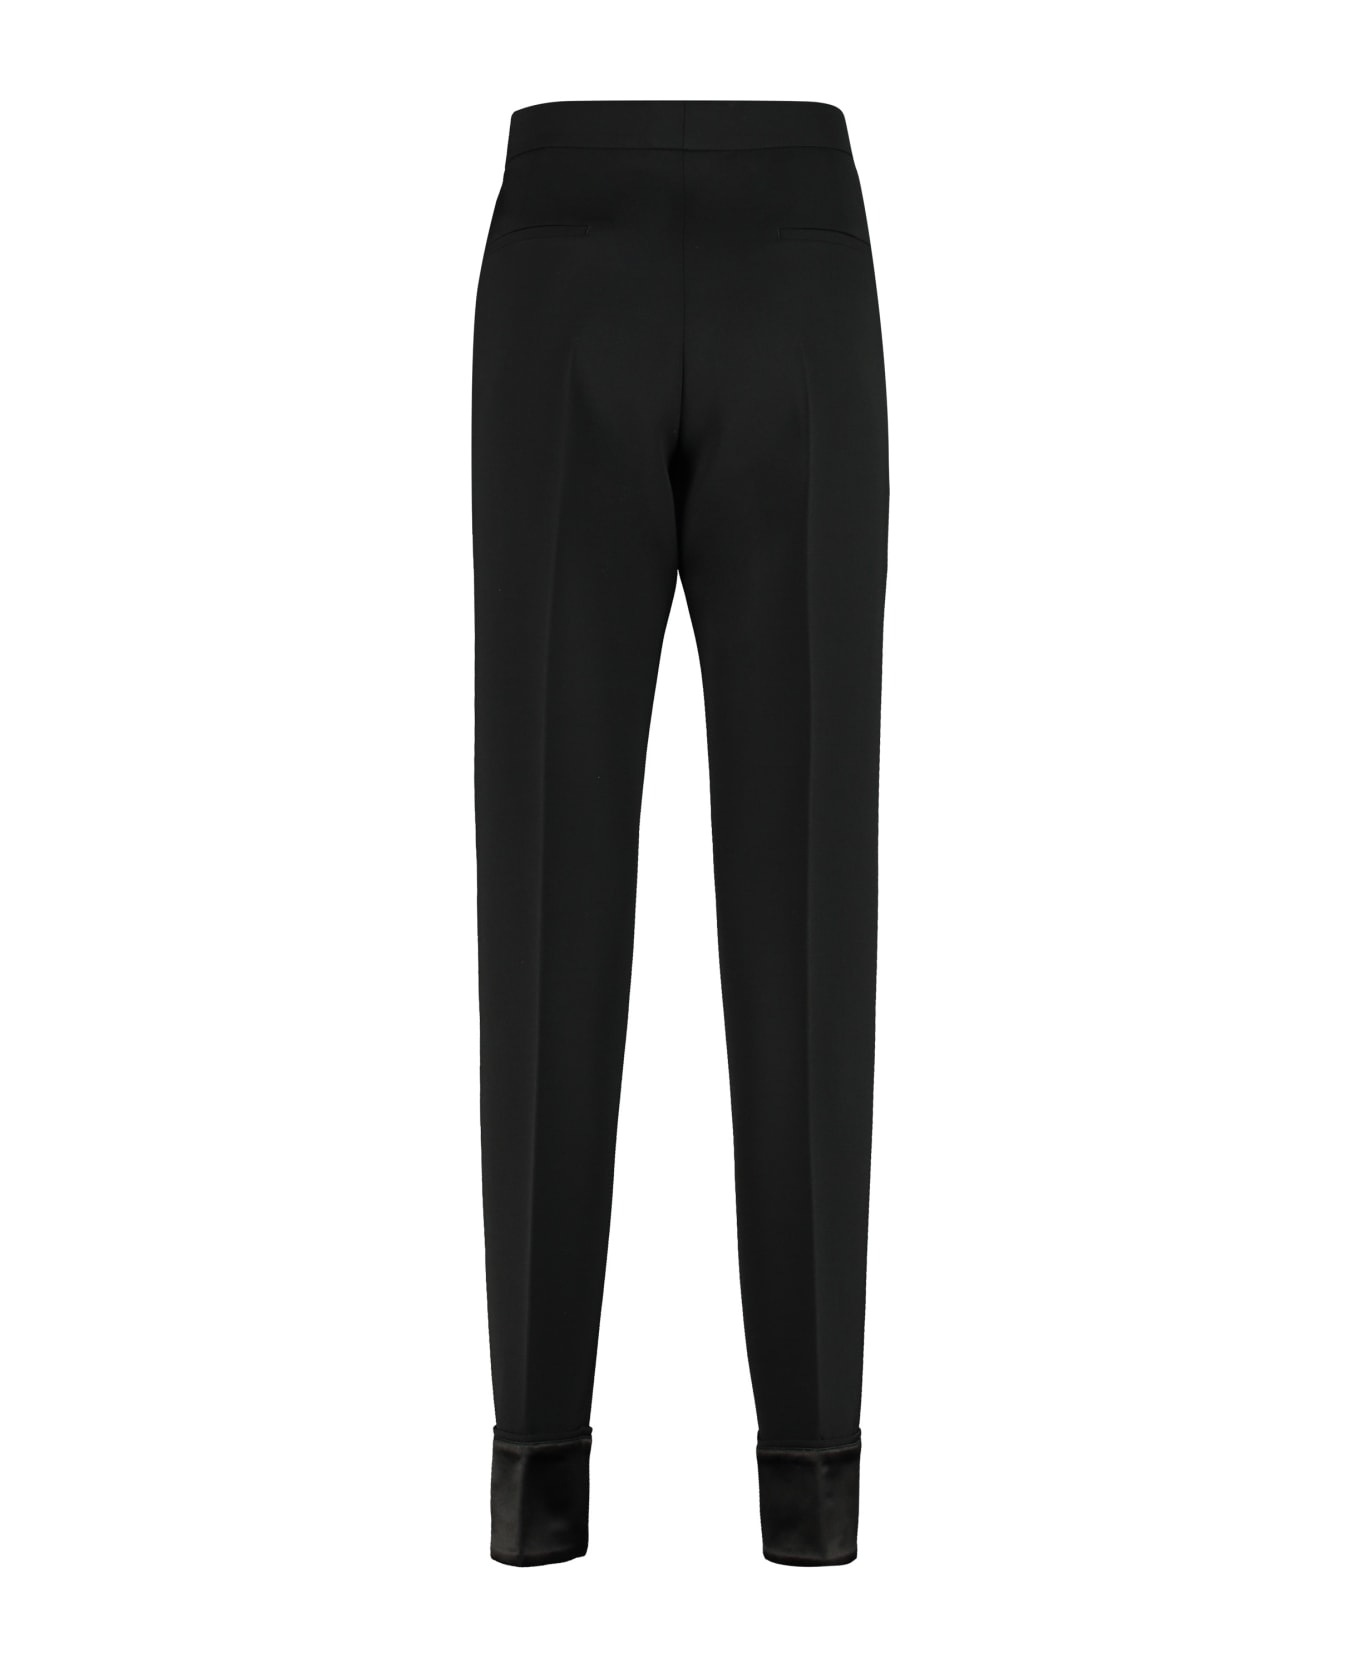 Givenchy Wool Tailored Trousers - black ボトムス